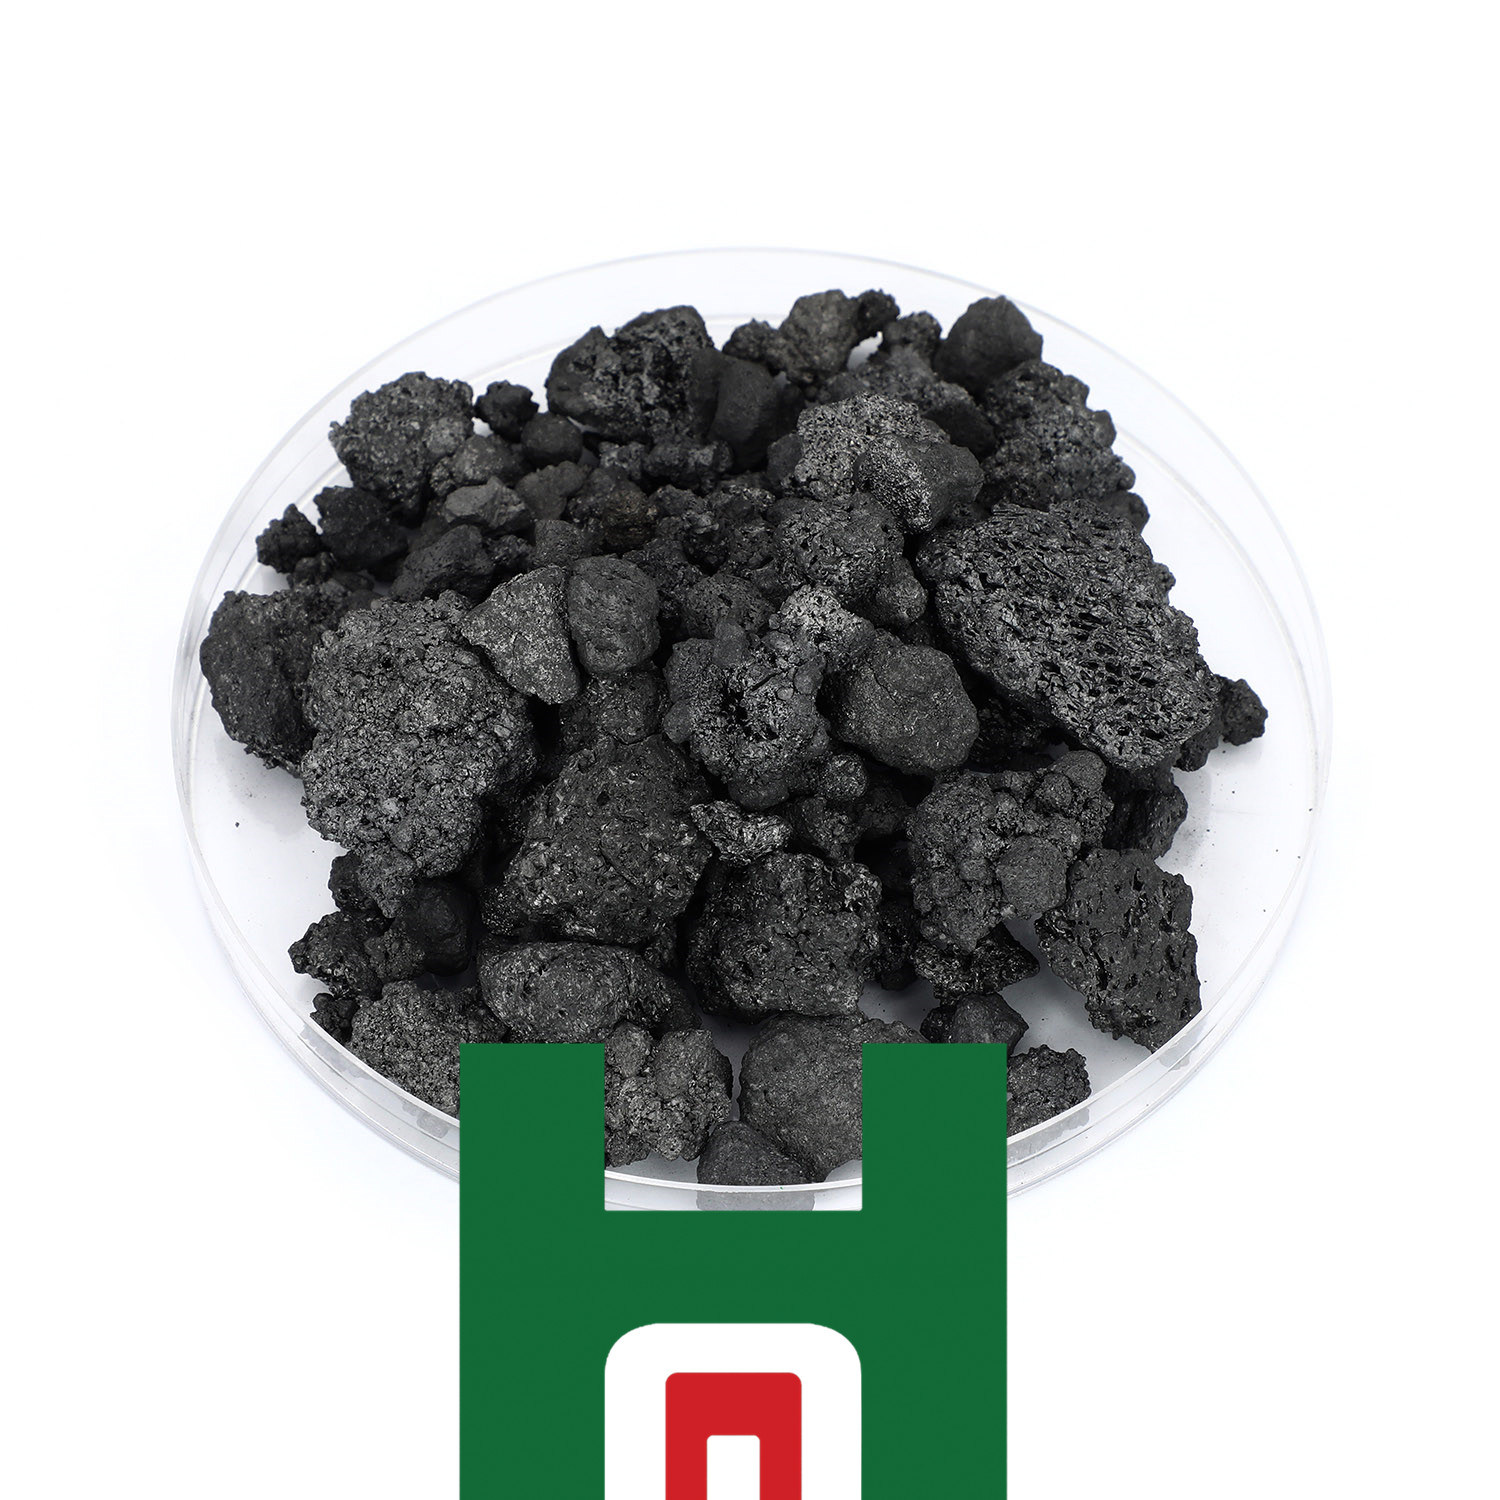 Manufacturers Black silicon carbide powder is in stock